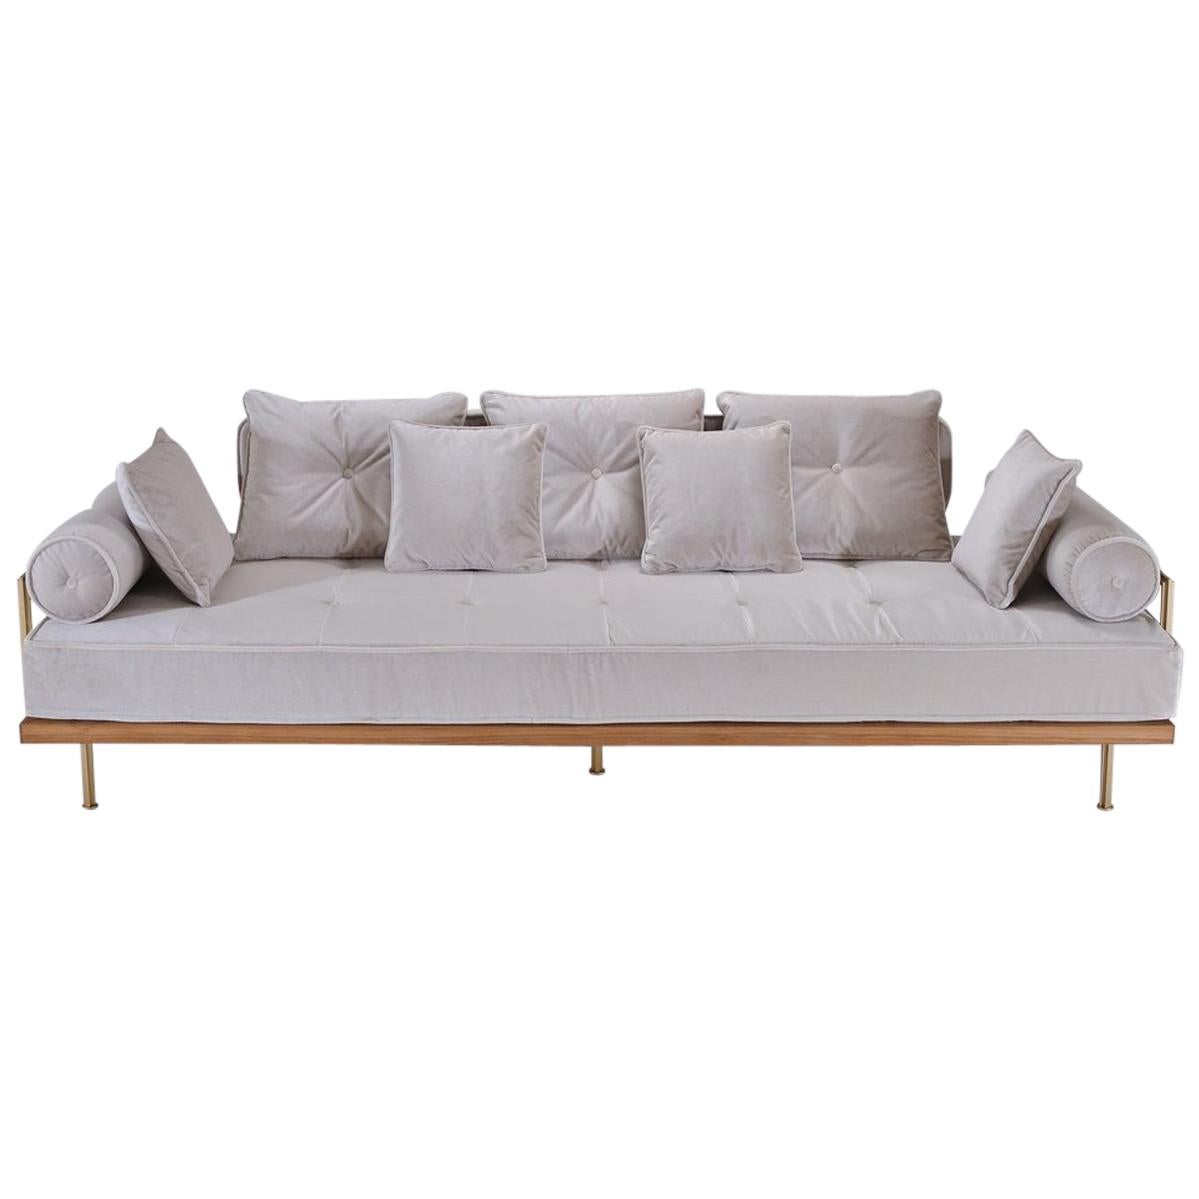 Bespoke Three-Seat Sofa with Brass and Bleached Hardwood Frame by P. Tendercool For Sale